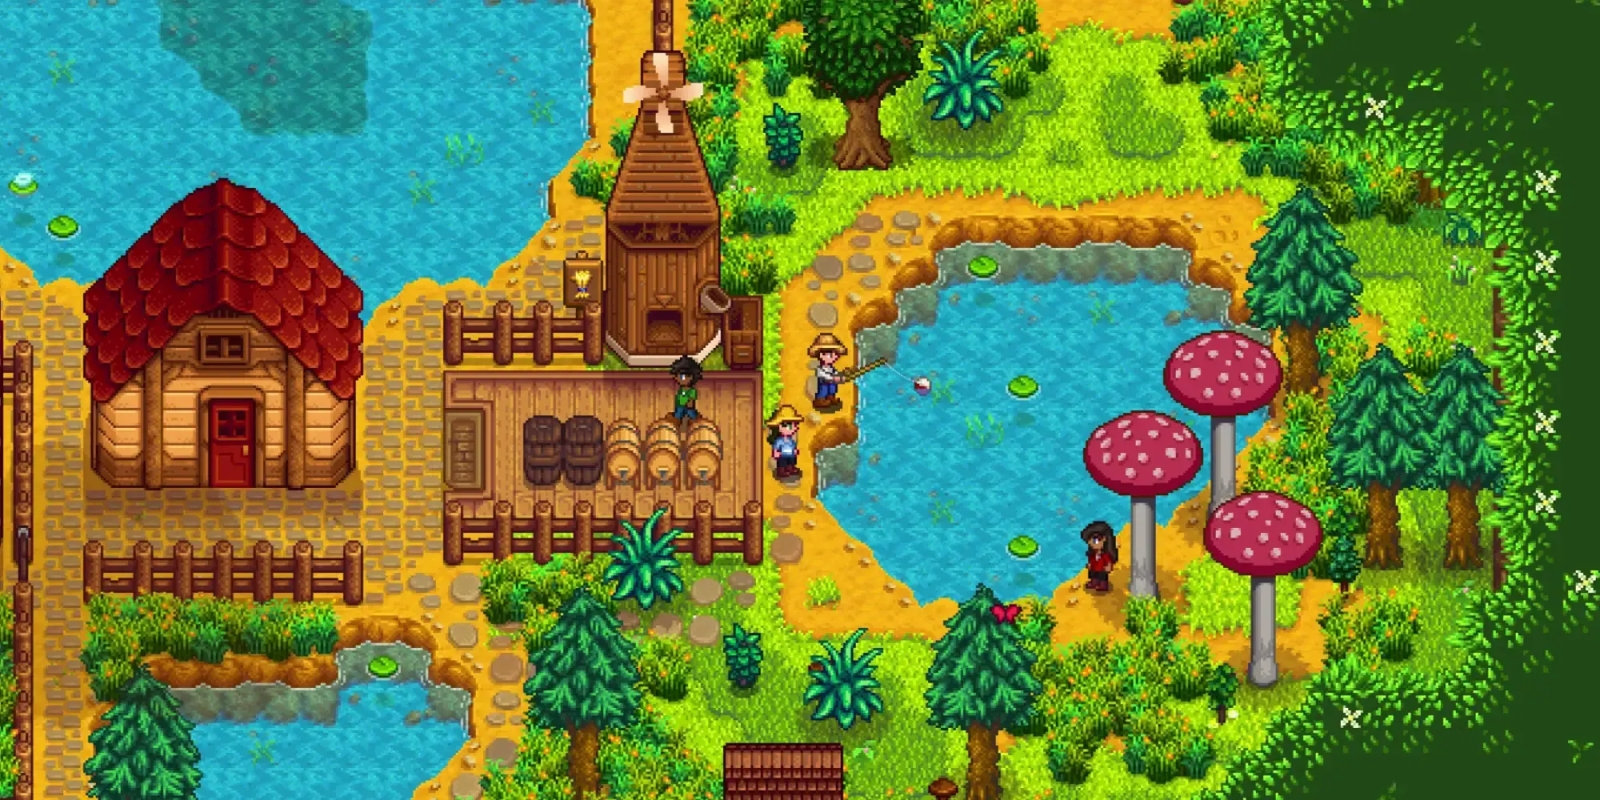 Apple arcade adding stardew valley remastered ridiculous fishing and more.webp